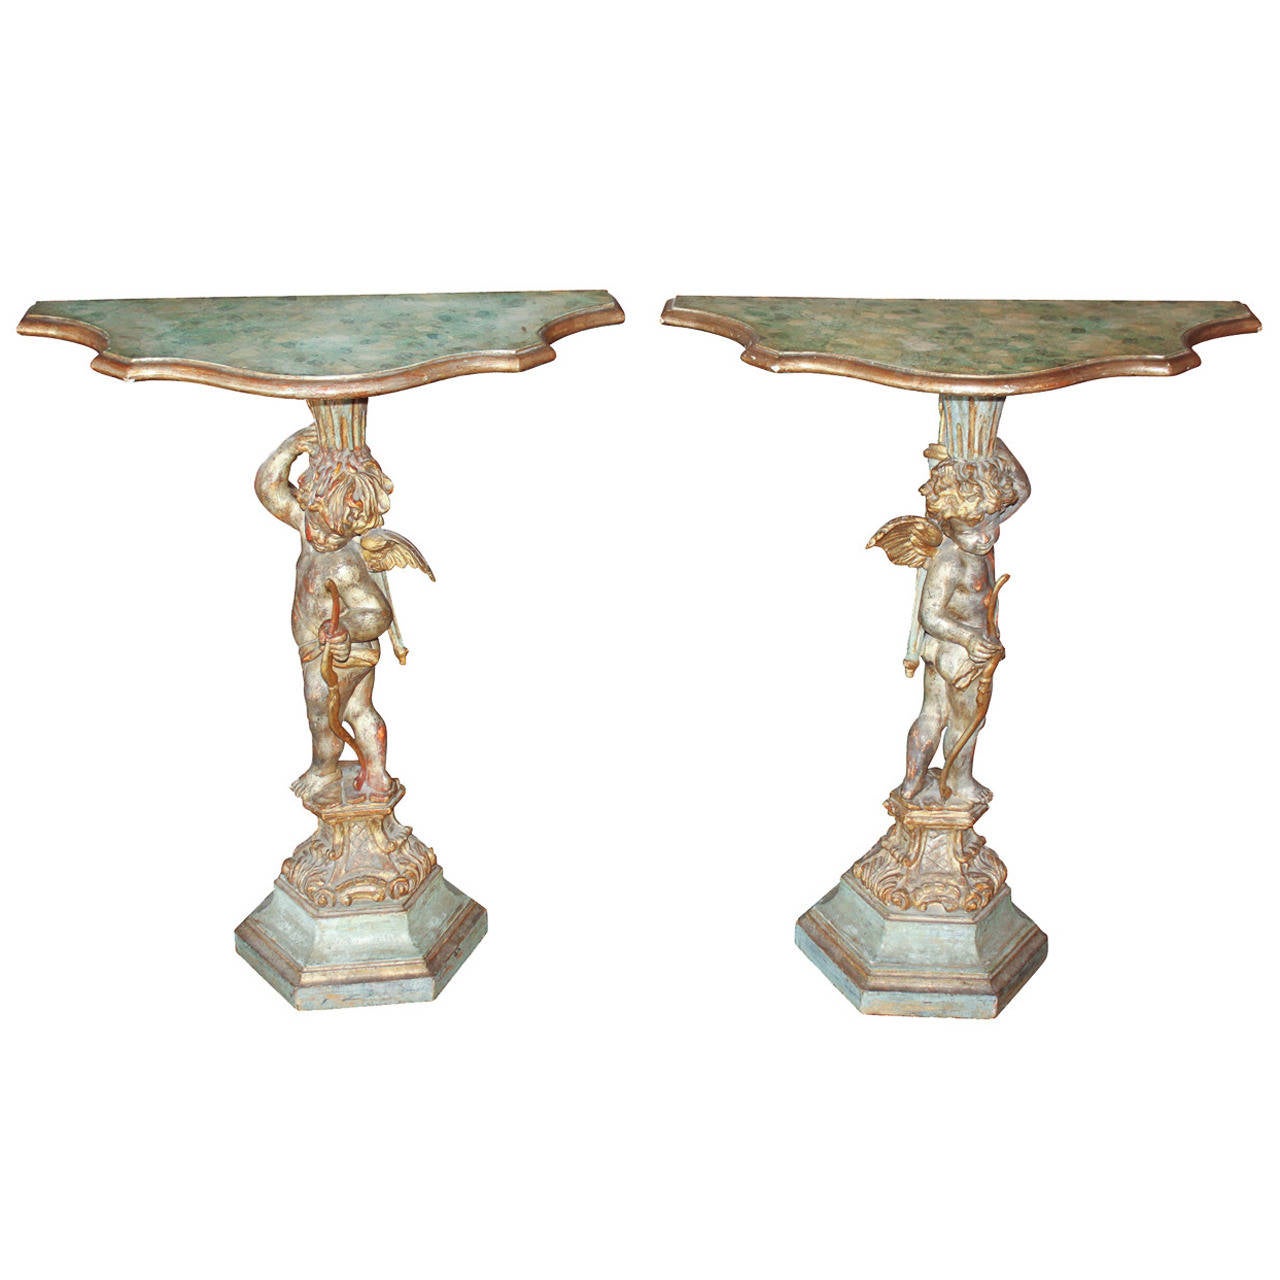 Sensational pair of Italian polychrome cherub-form side tables. Each having a hand carved cherub holding a bow and resting on hexagonal base with acanthus leaf motif. Exhibiting excellent aged polychrome finish.